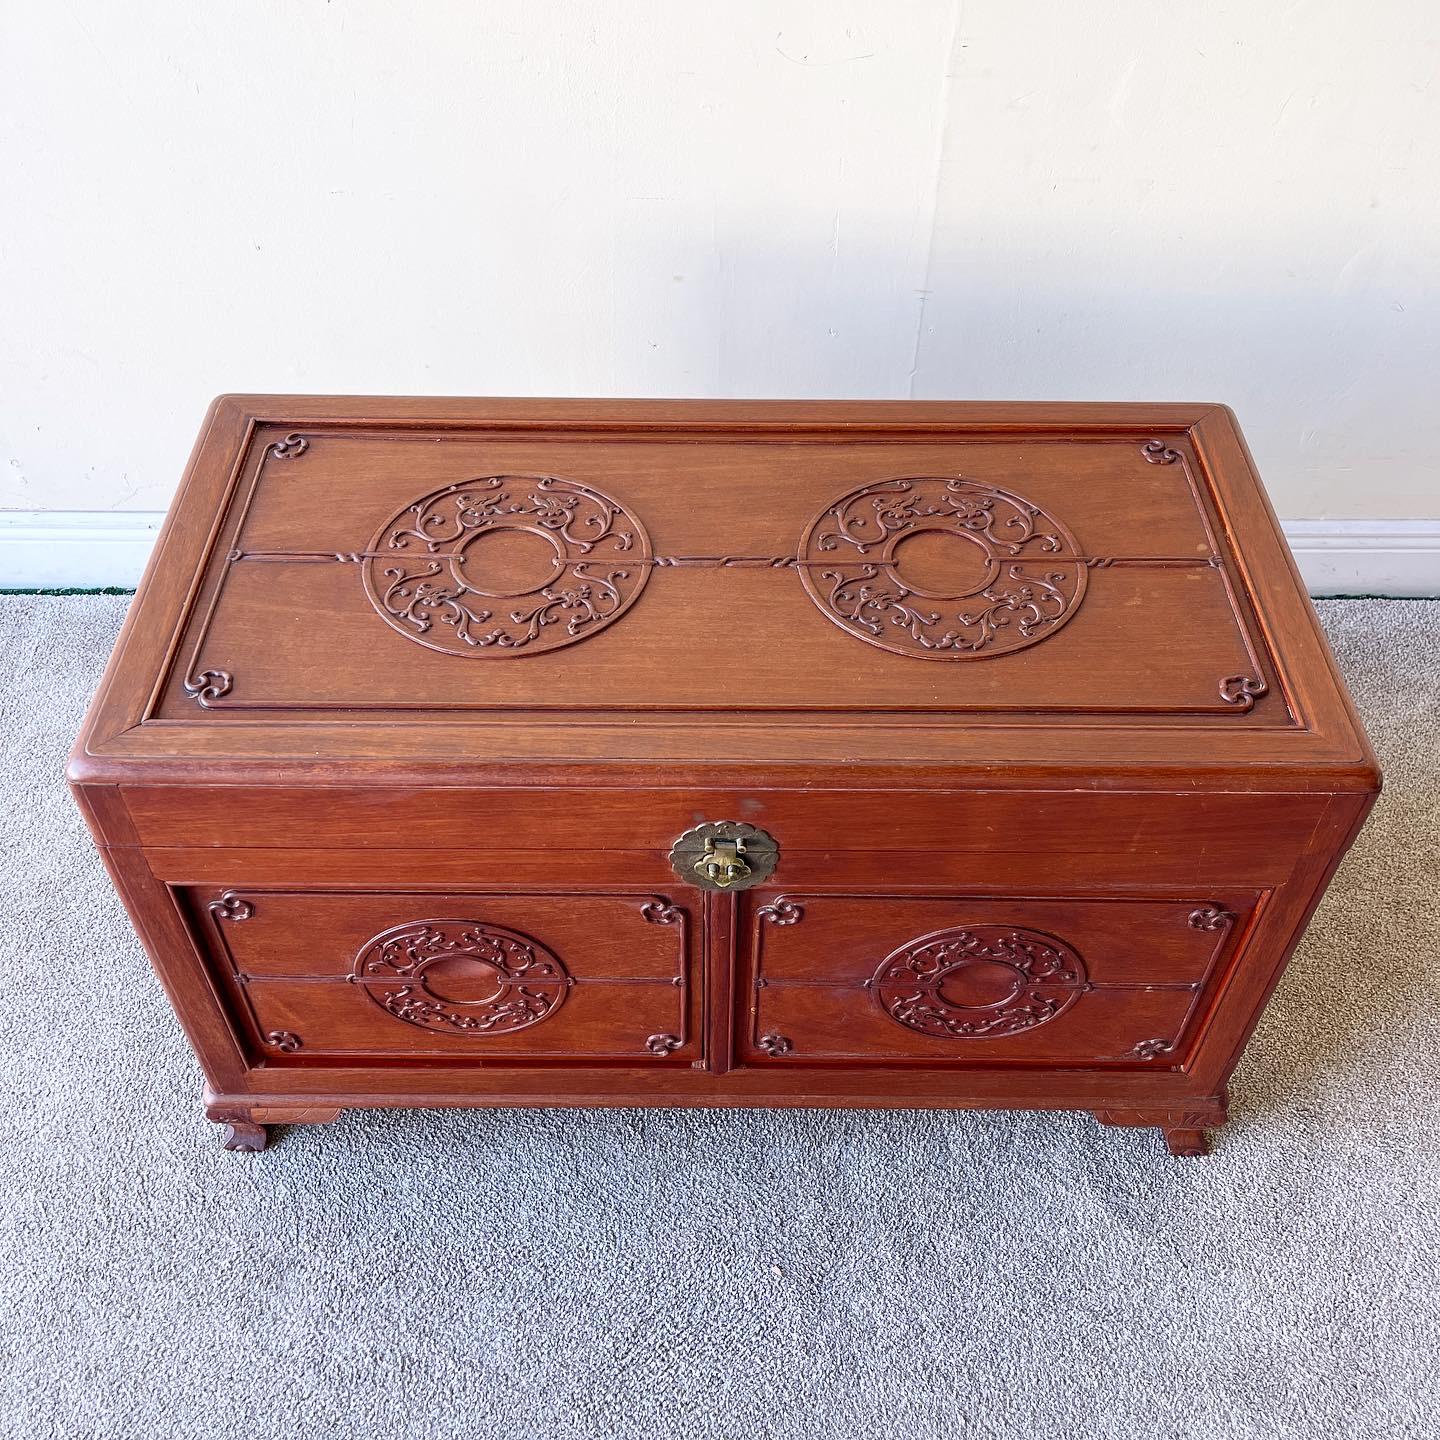 Early 20th century Asian Dowry, blanket or storage chest. Bronze decorated having strong bronze hinges this functional and decorative chest is simply stunning having an all over brass and wood design. Adding a glass top this stunning chest would